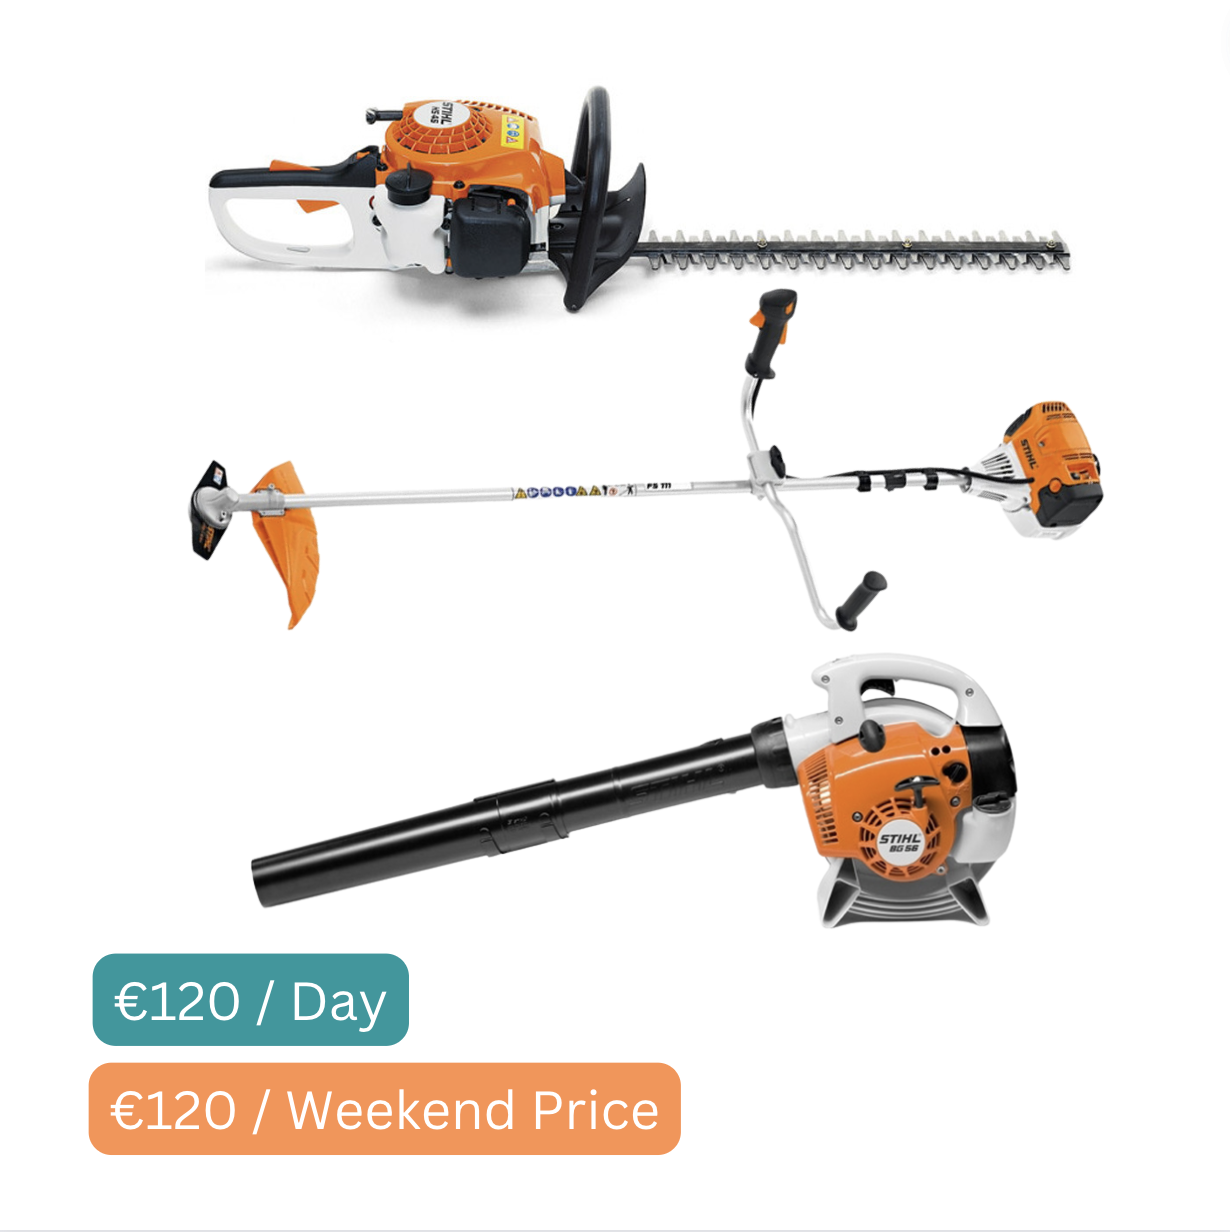 Hedge Trimmer, Weed Eater and Leaf Blower - Hire Bundle 